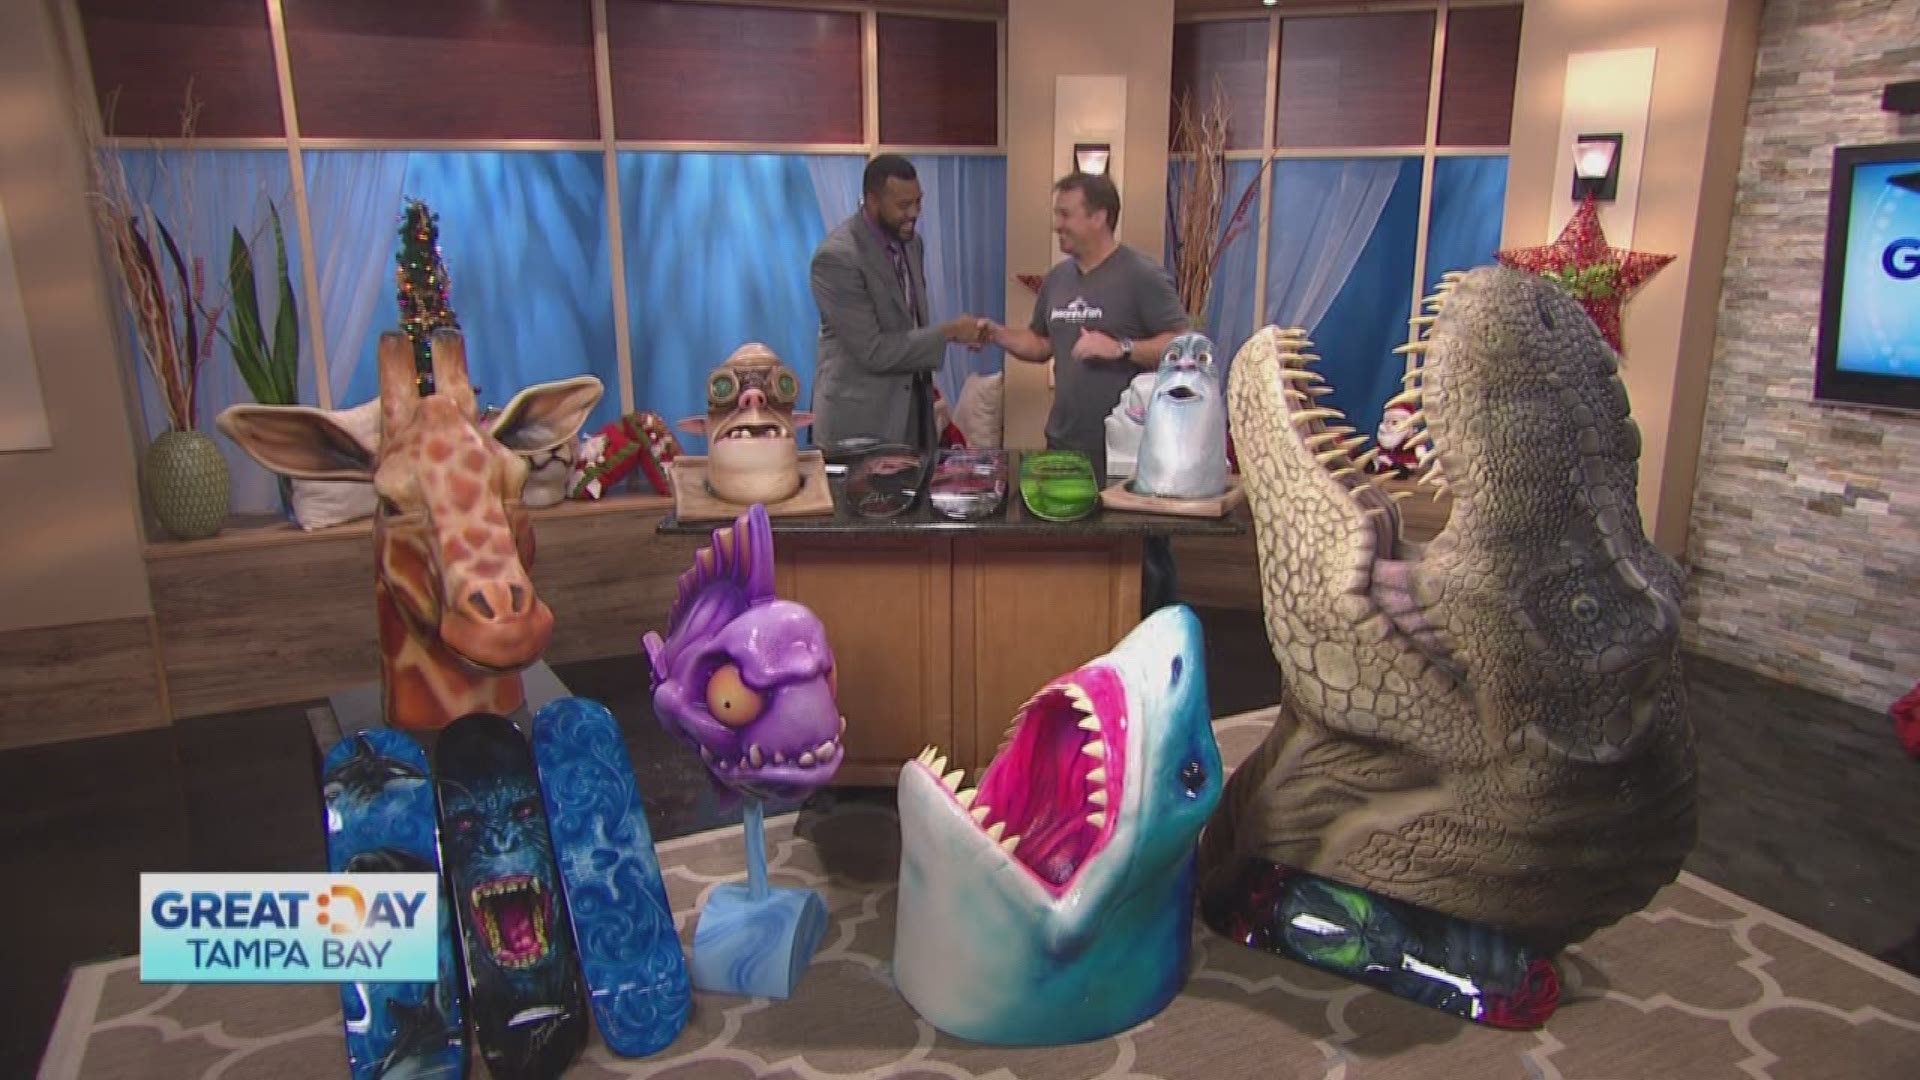 Artist Jason Hulfish and his outrageous designs have appeared on HGTV and ABC's Extreme Makeover: Home Edition.